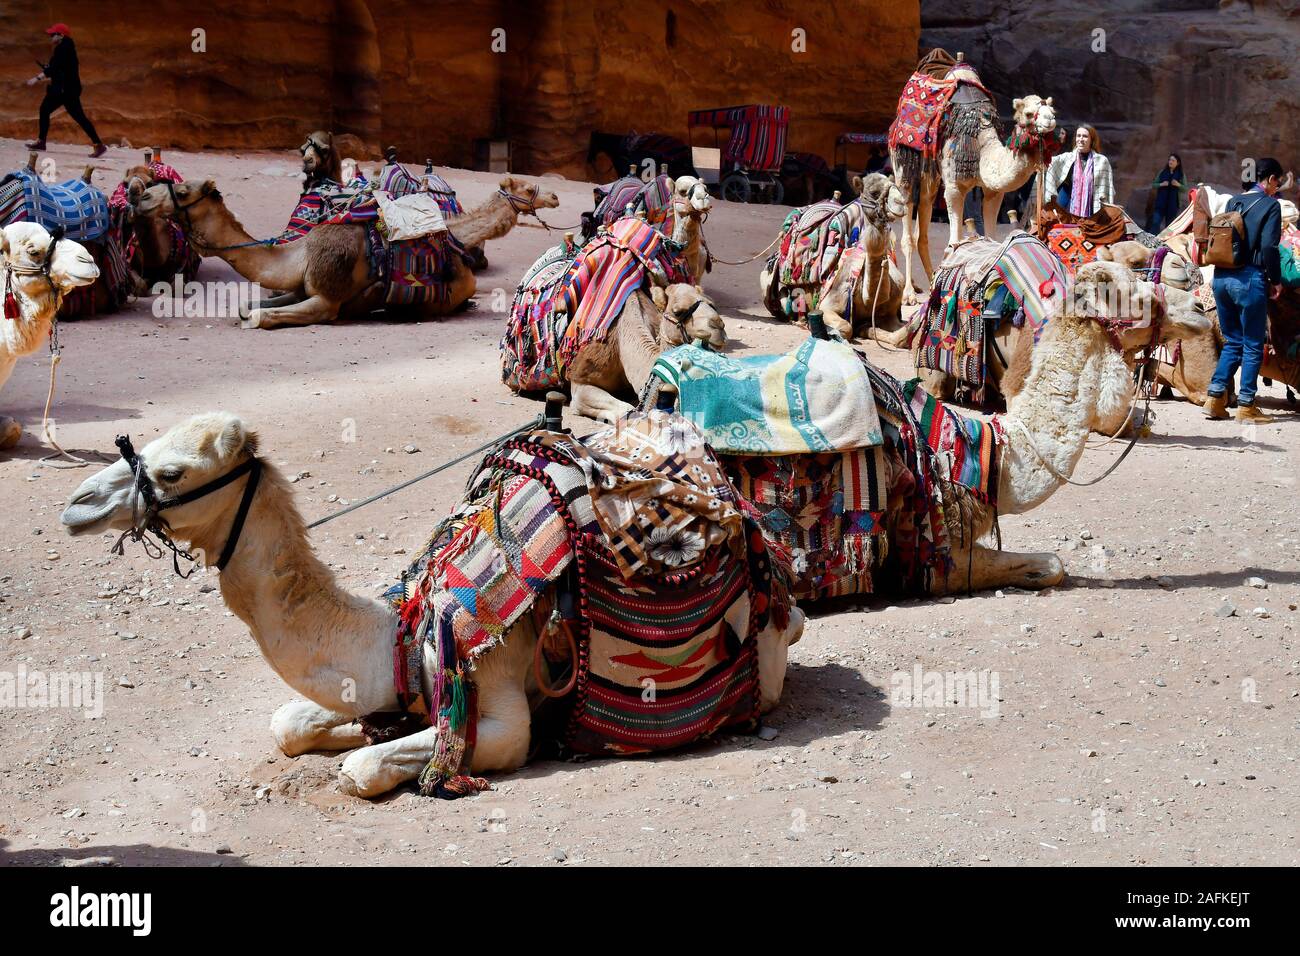 Petra, Jordan - March 06, 2019: Unidentified tourists and camels for transport at archaeological site of ancient Petra Stock Photo